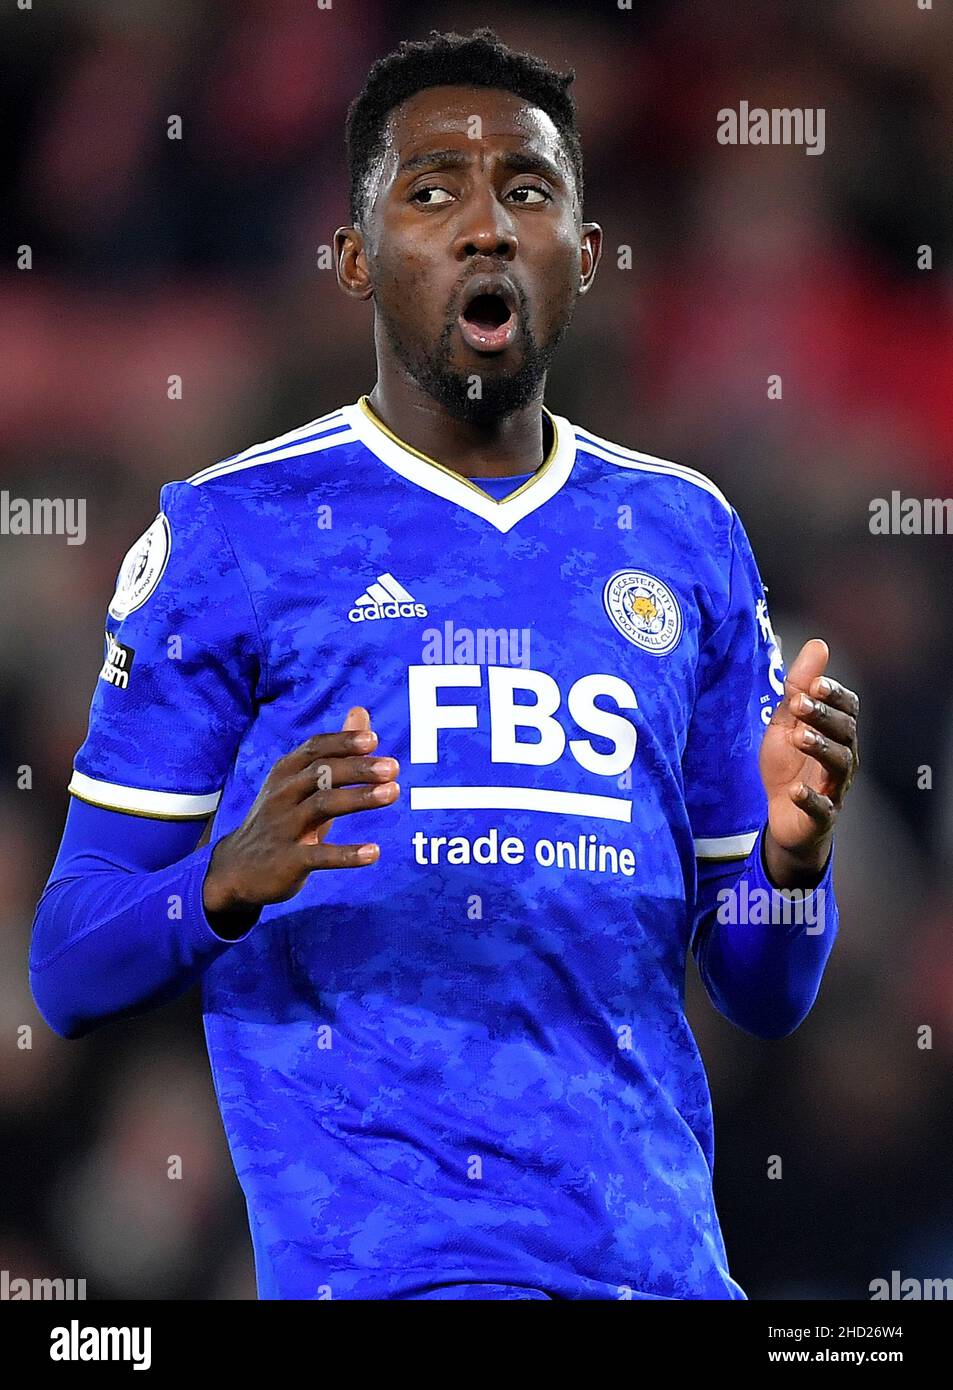 Wilfred Ndidi of Leicester City - Southampton v Leicester City, Premier League, St Mary's Stadium, Southampton, UK - 1st December 2021  Editorial Use Only - DataCo restrictions apply Stock Photo